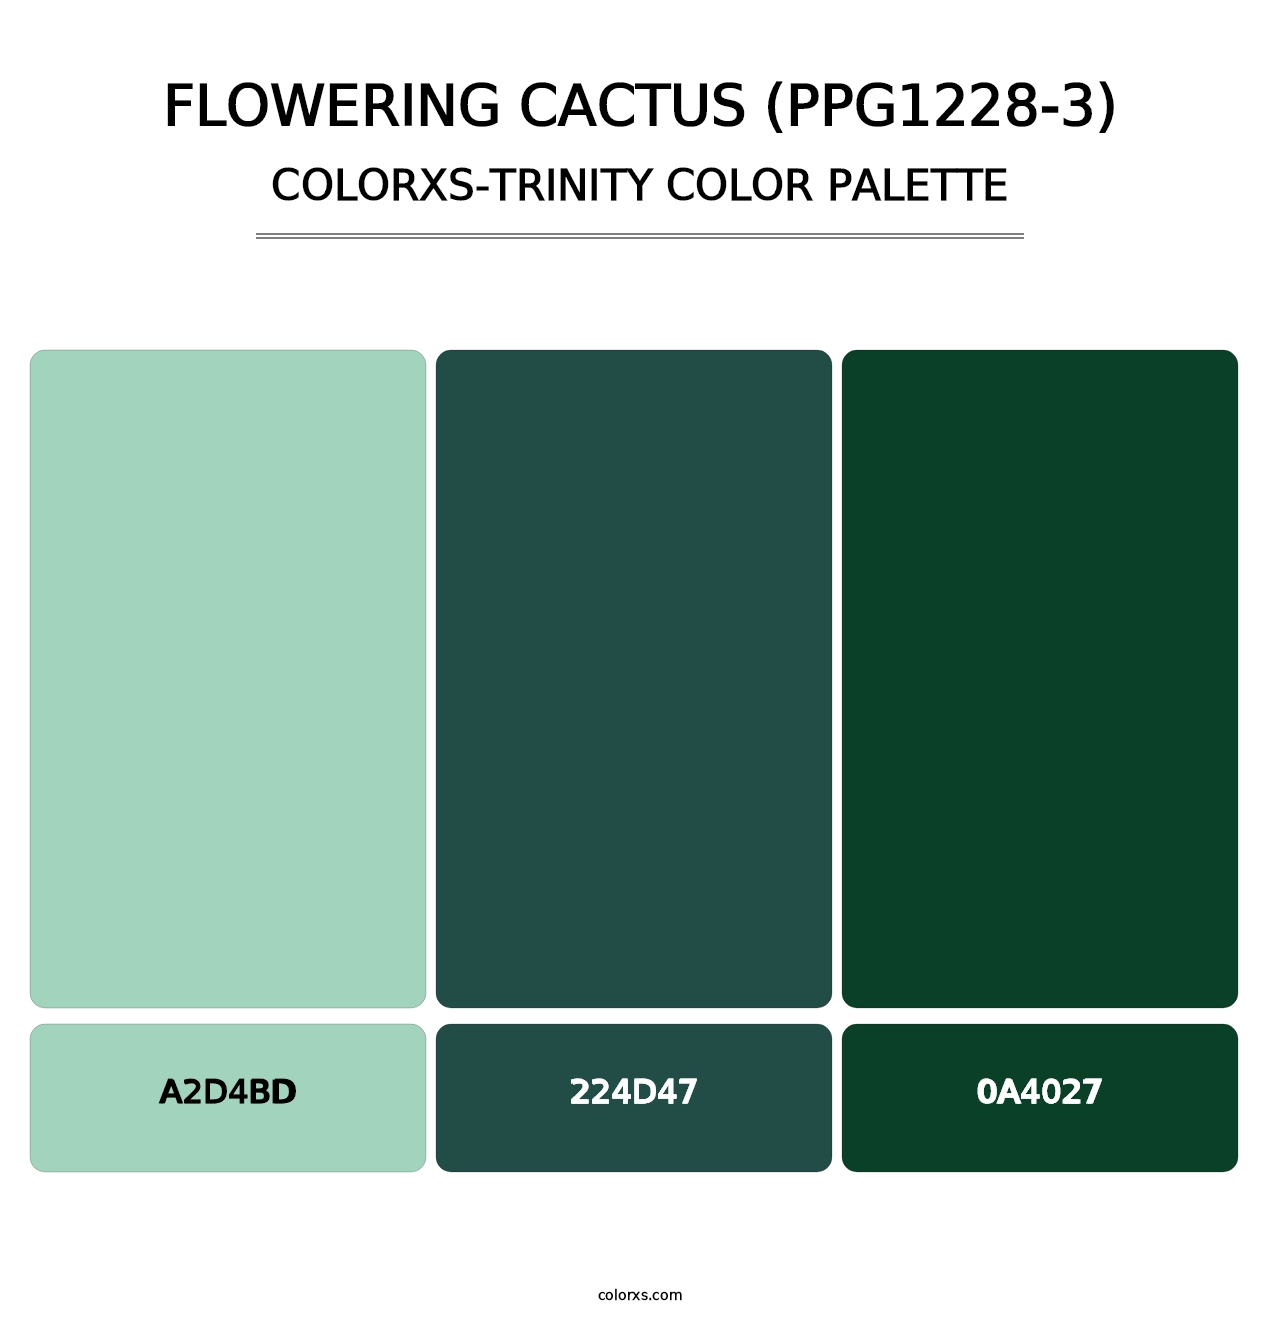 Flowering Cactus (PPG1228-3) - Colorxs Trinity Palette